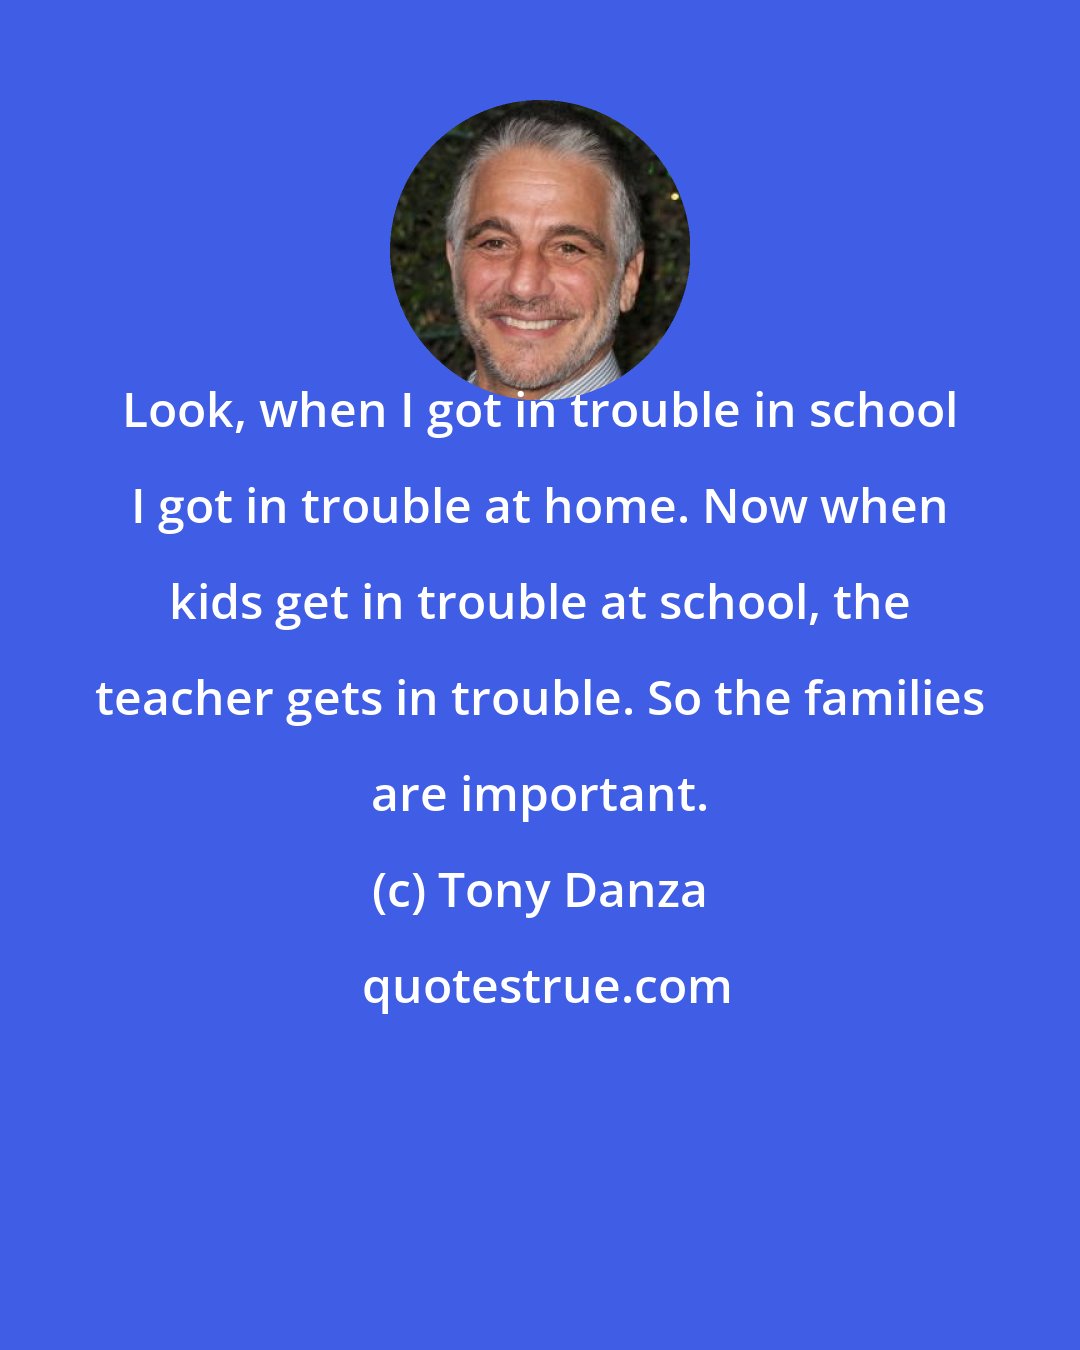 Tony Danza: Look, when I got in trouble in school I got in trouble at home. Now when kids get in trouble at school, the teacher gets in trouble. So the families are important.